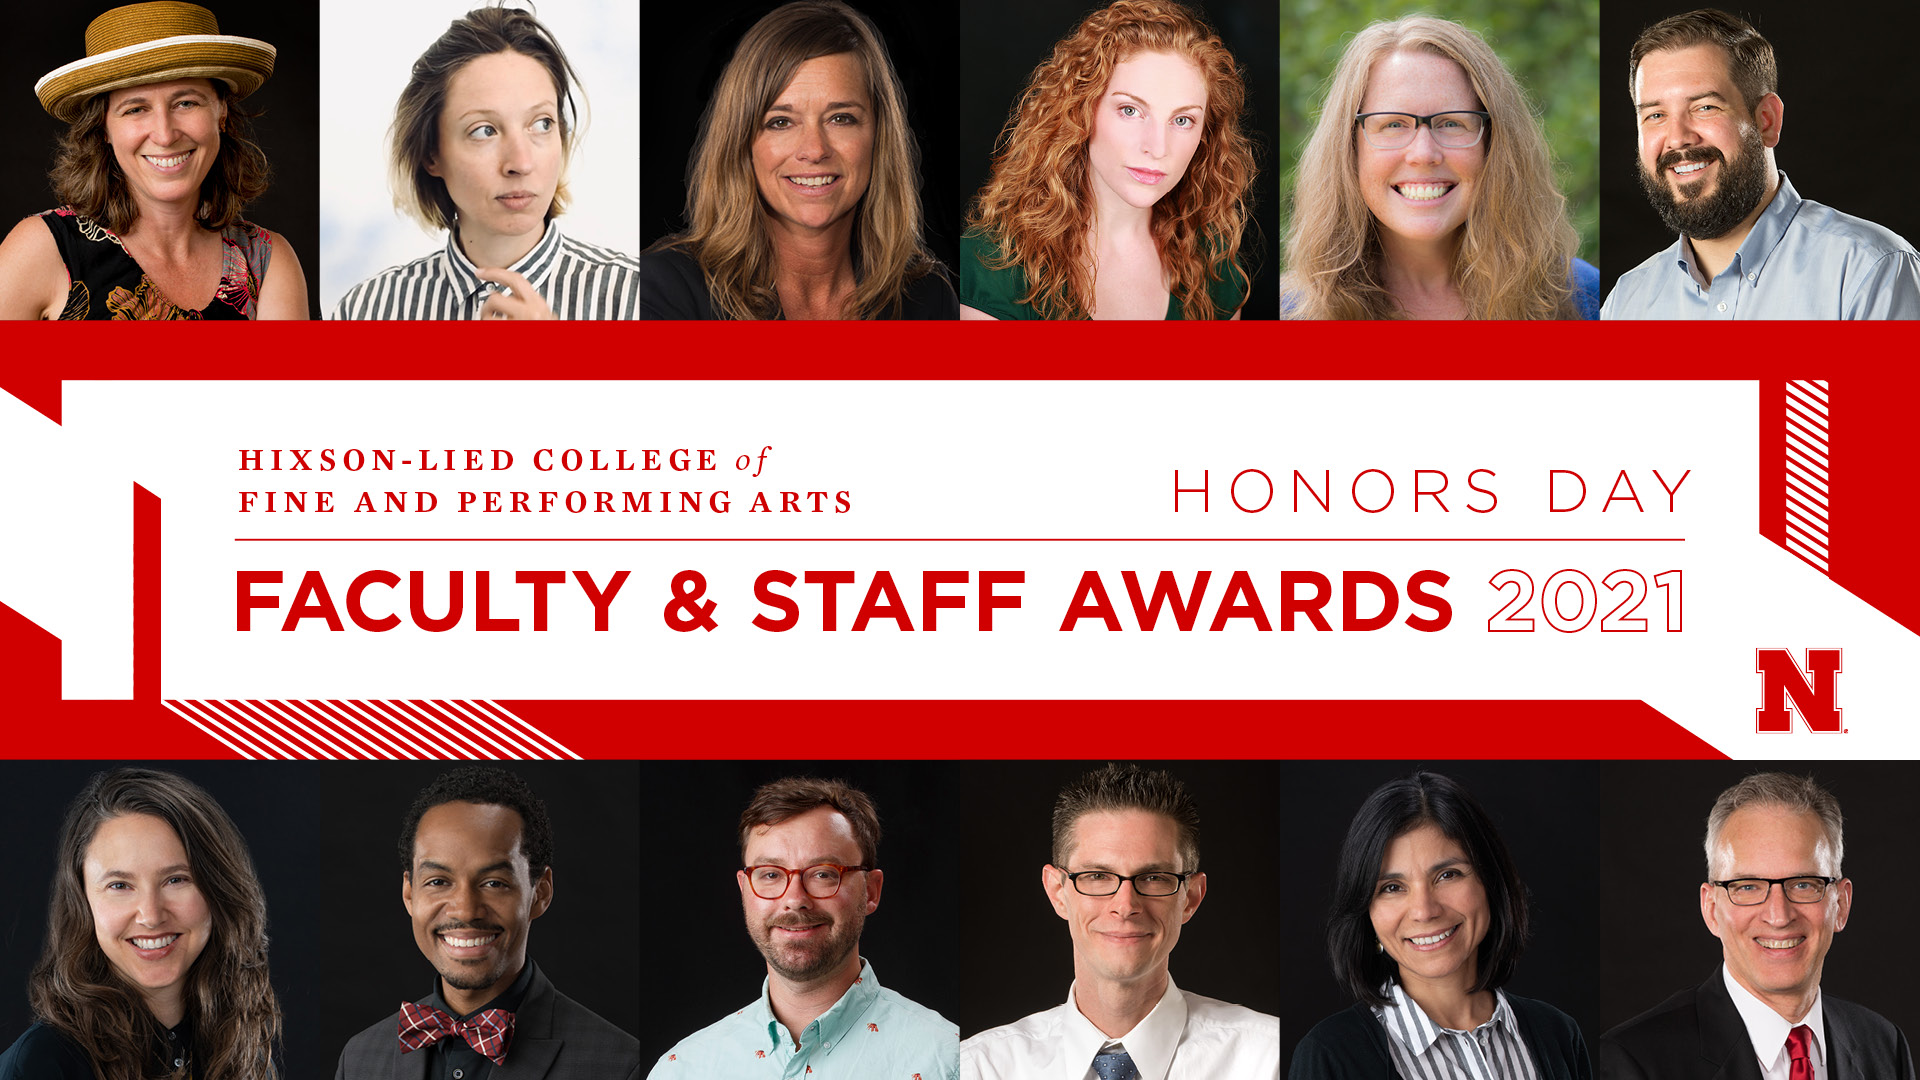 The Hixson-Lied Faculty and Staff Awards recognize outstanding performance and accomplishments in the areas of teaching; research and creative activity; faculty service, outreach and engagement; outstanding lecturer; and staff service.